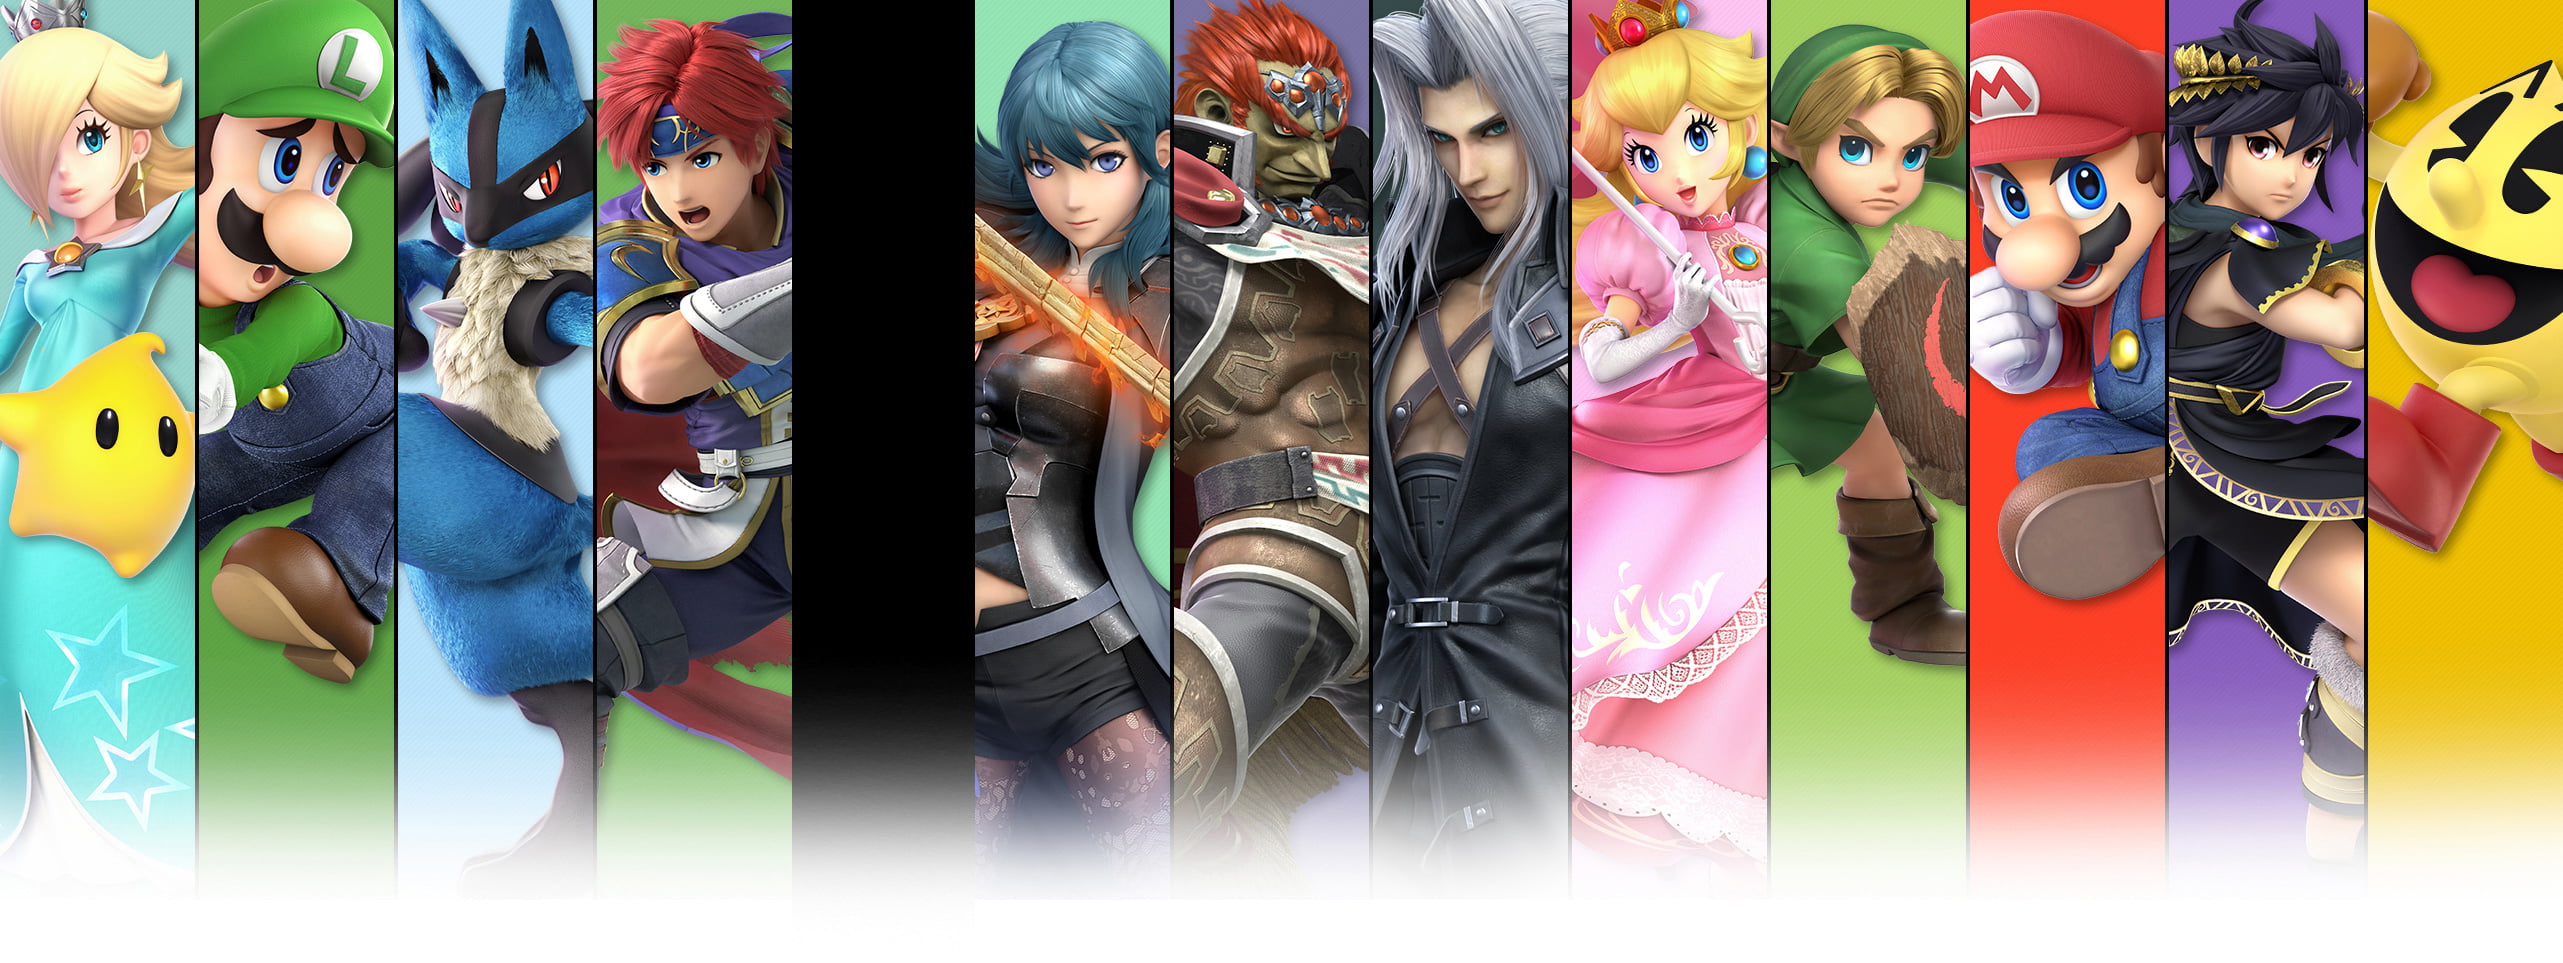 Fighters | Super Smash Bros. Ultimate for the Nintendo Switch System |  Official Site